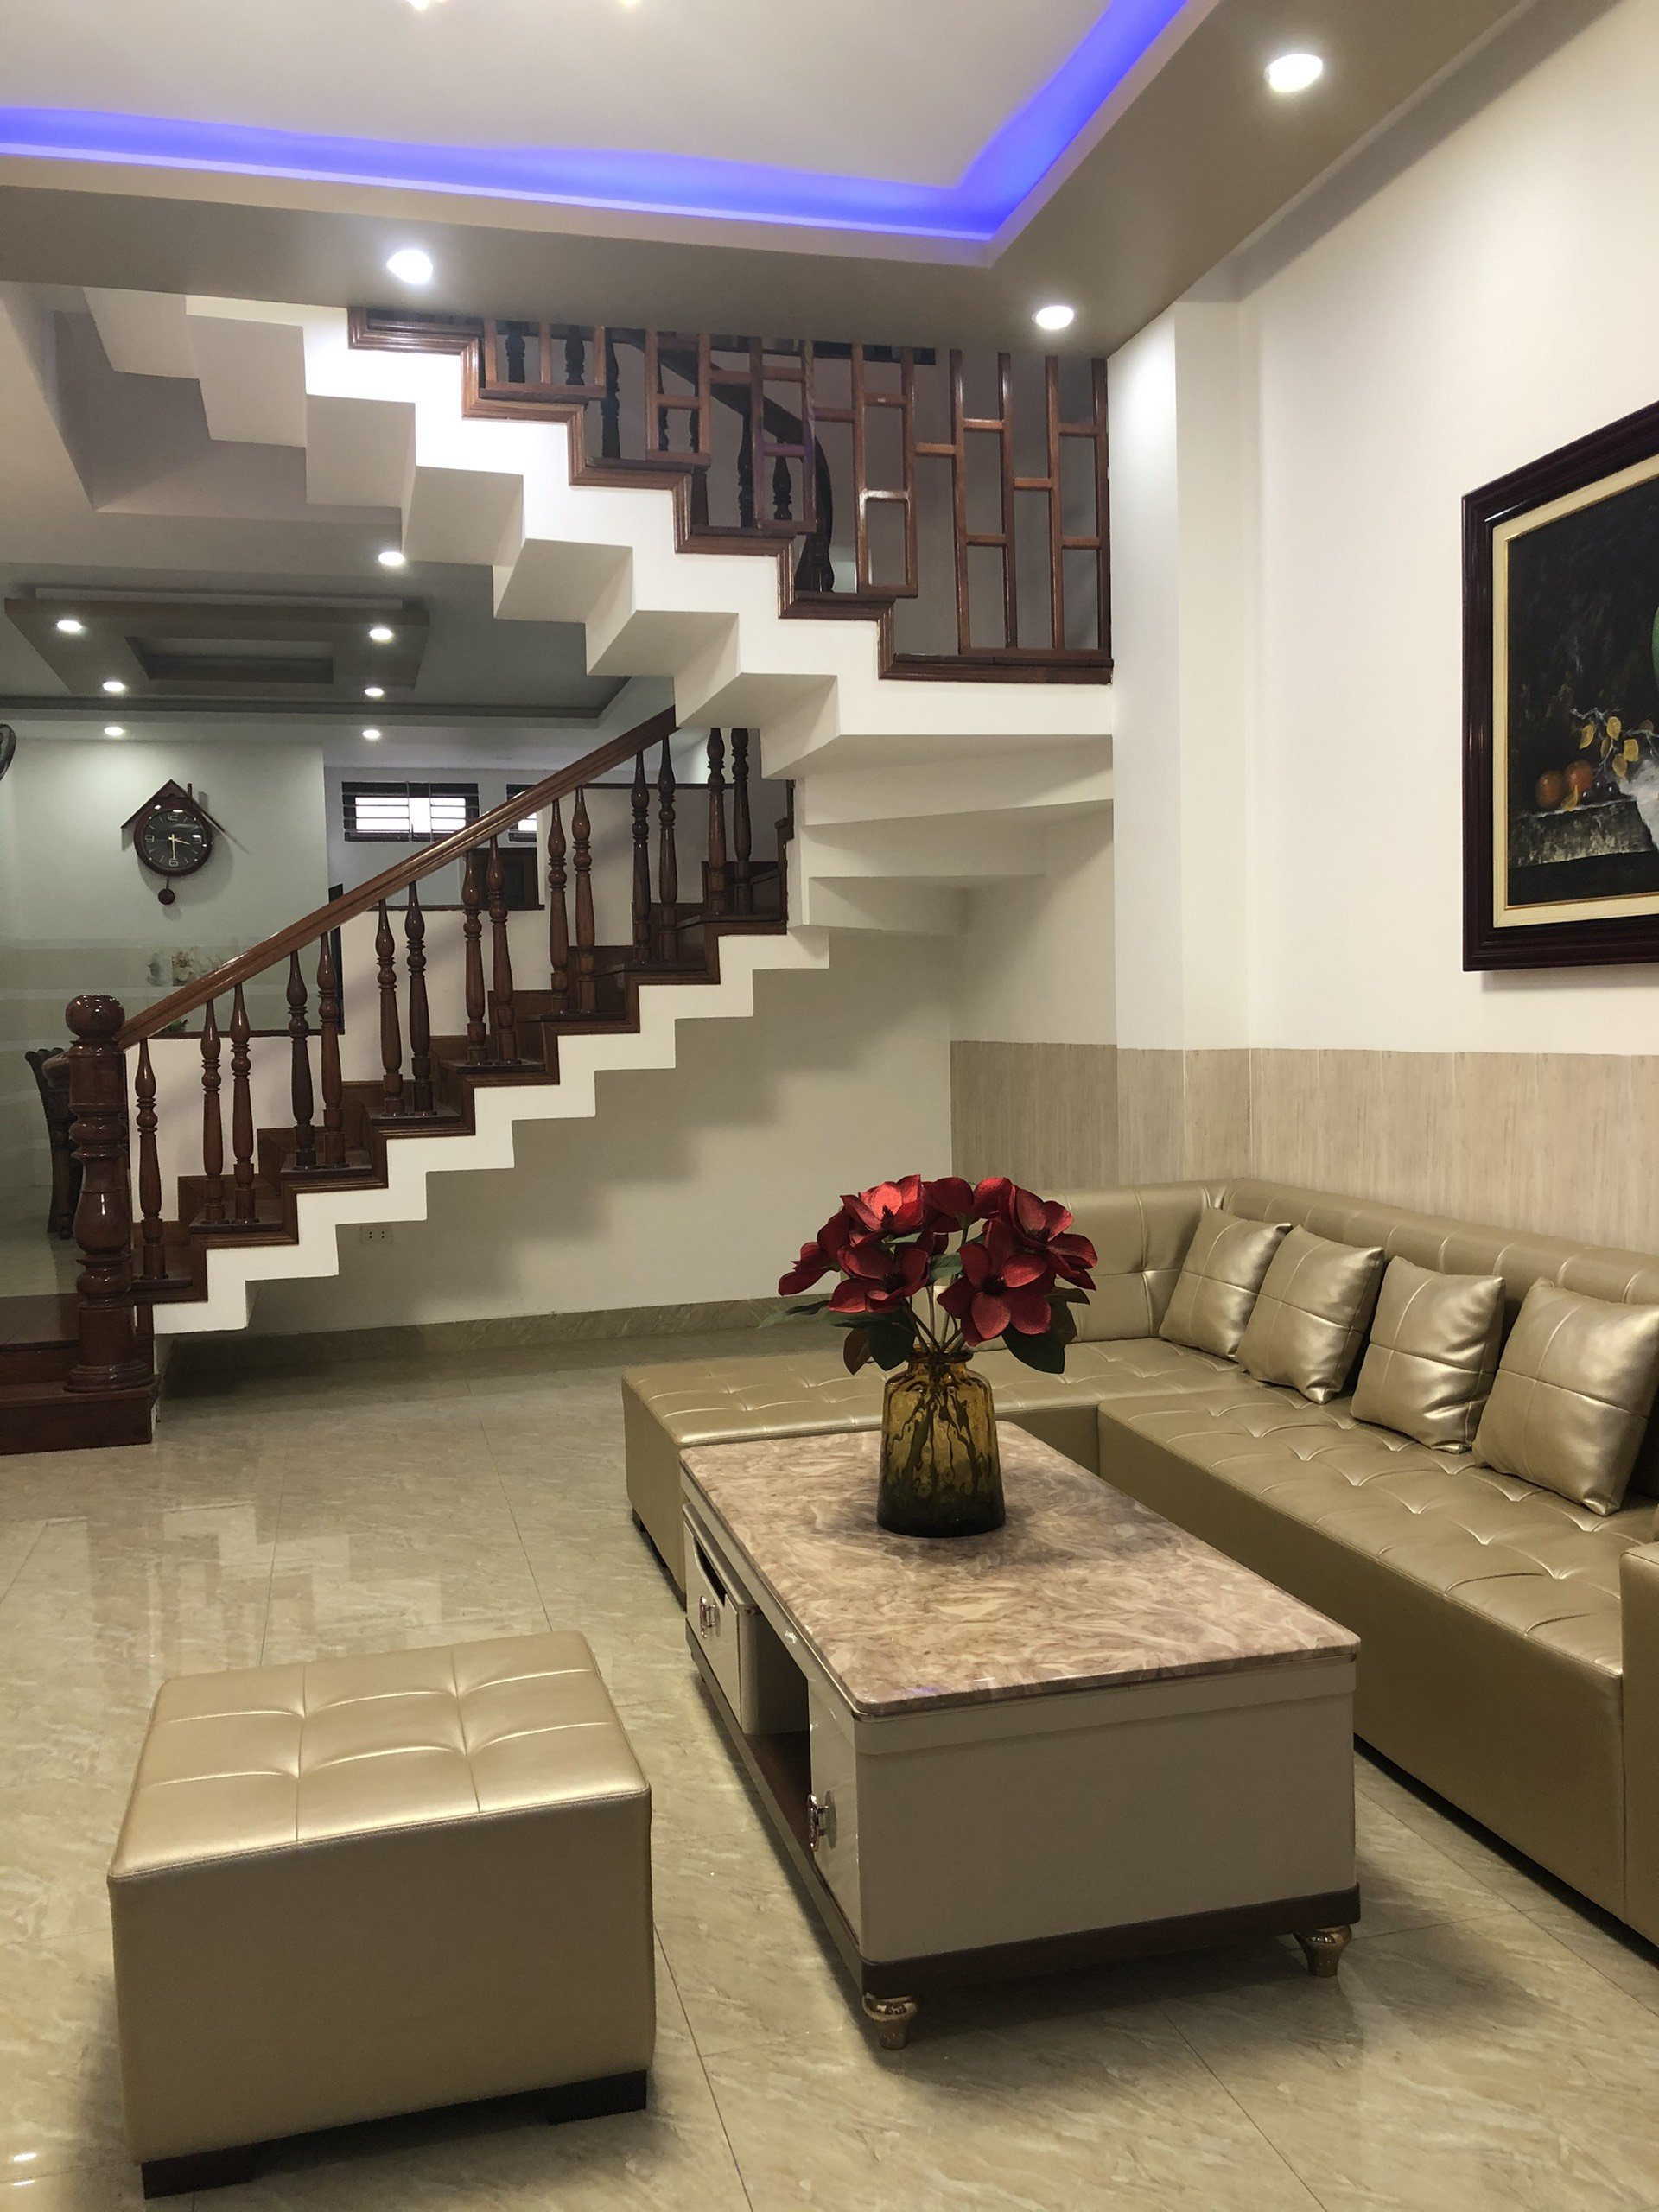 Affordable 3 bedroom House for rent In Son Tra Da Nang